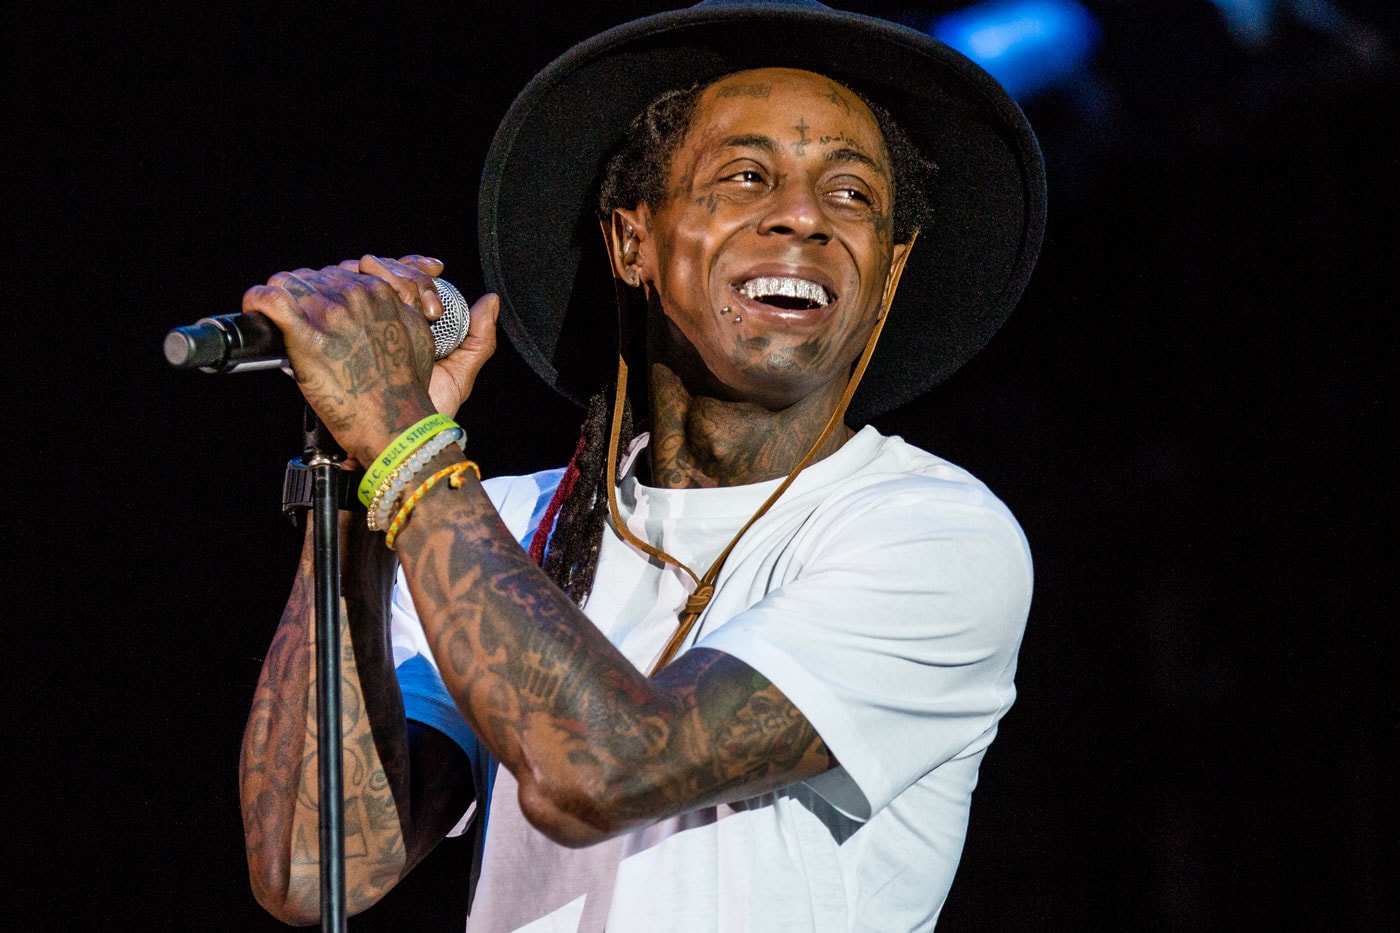 Lil Wayne Talks Drake & Meek Mill Beef and More in New Interview